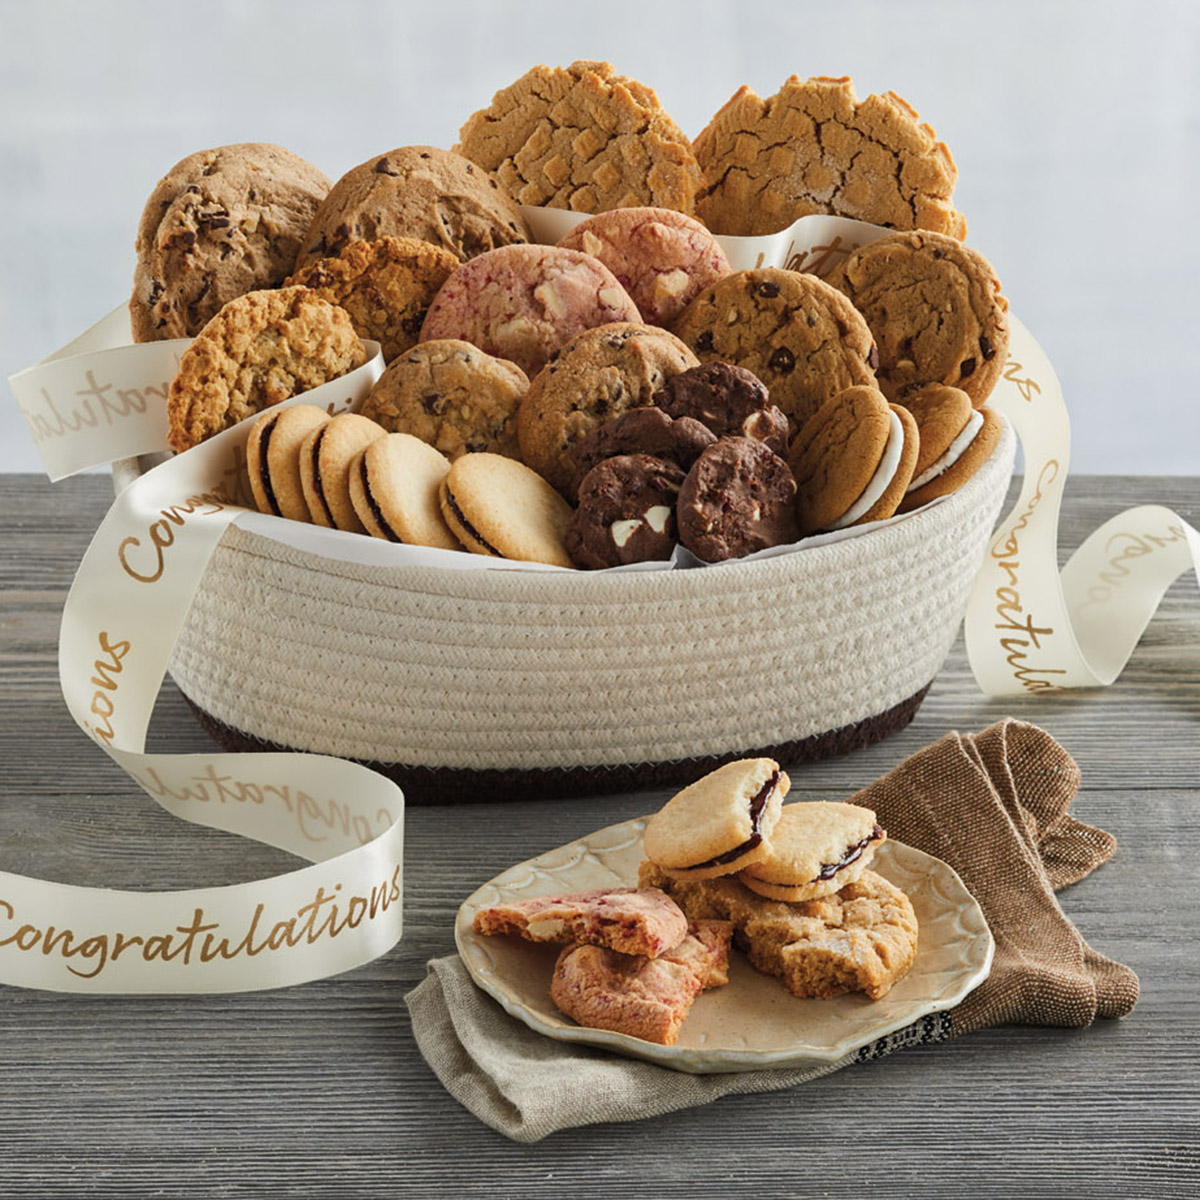 congratulations cookie basket for graduation gift